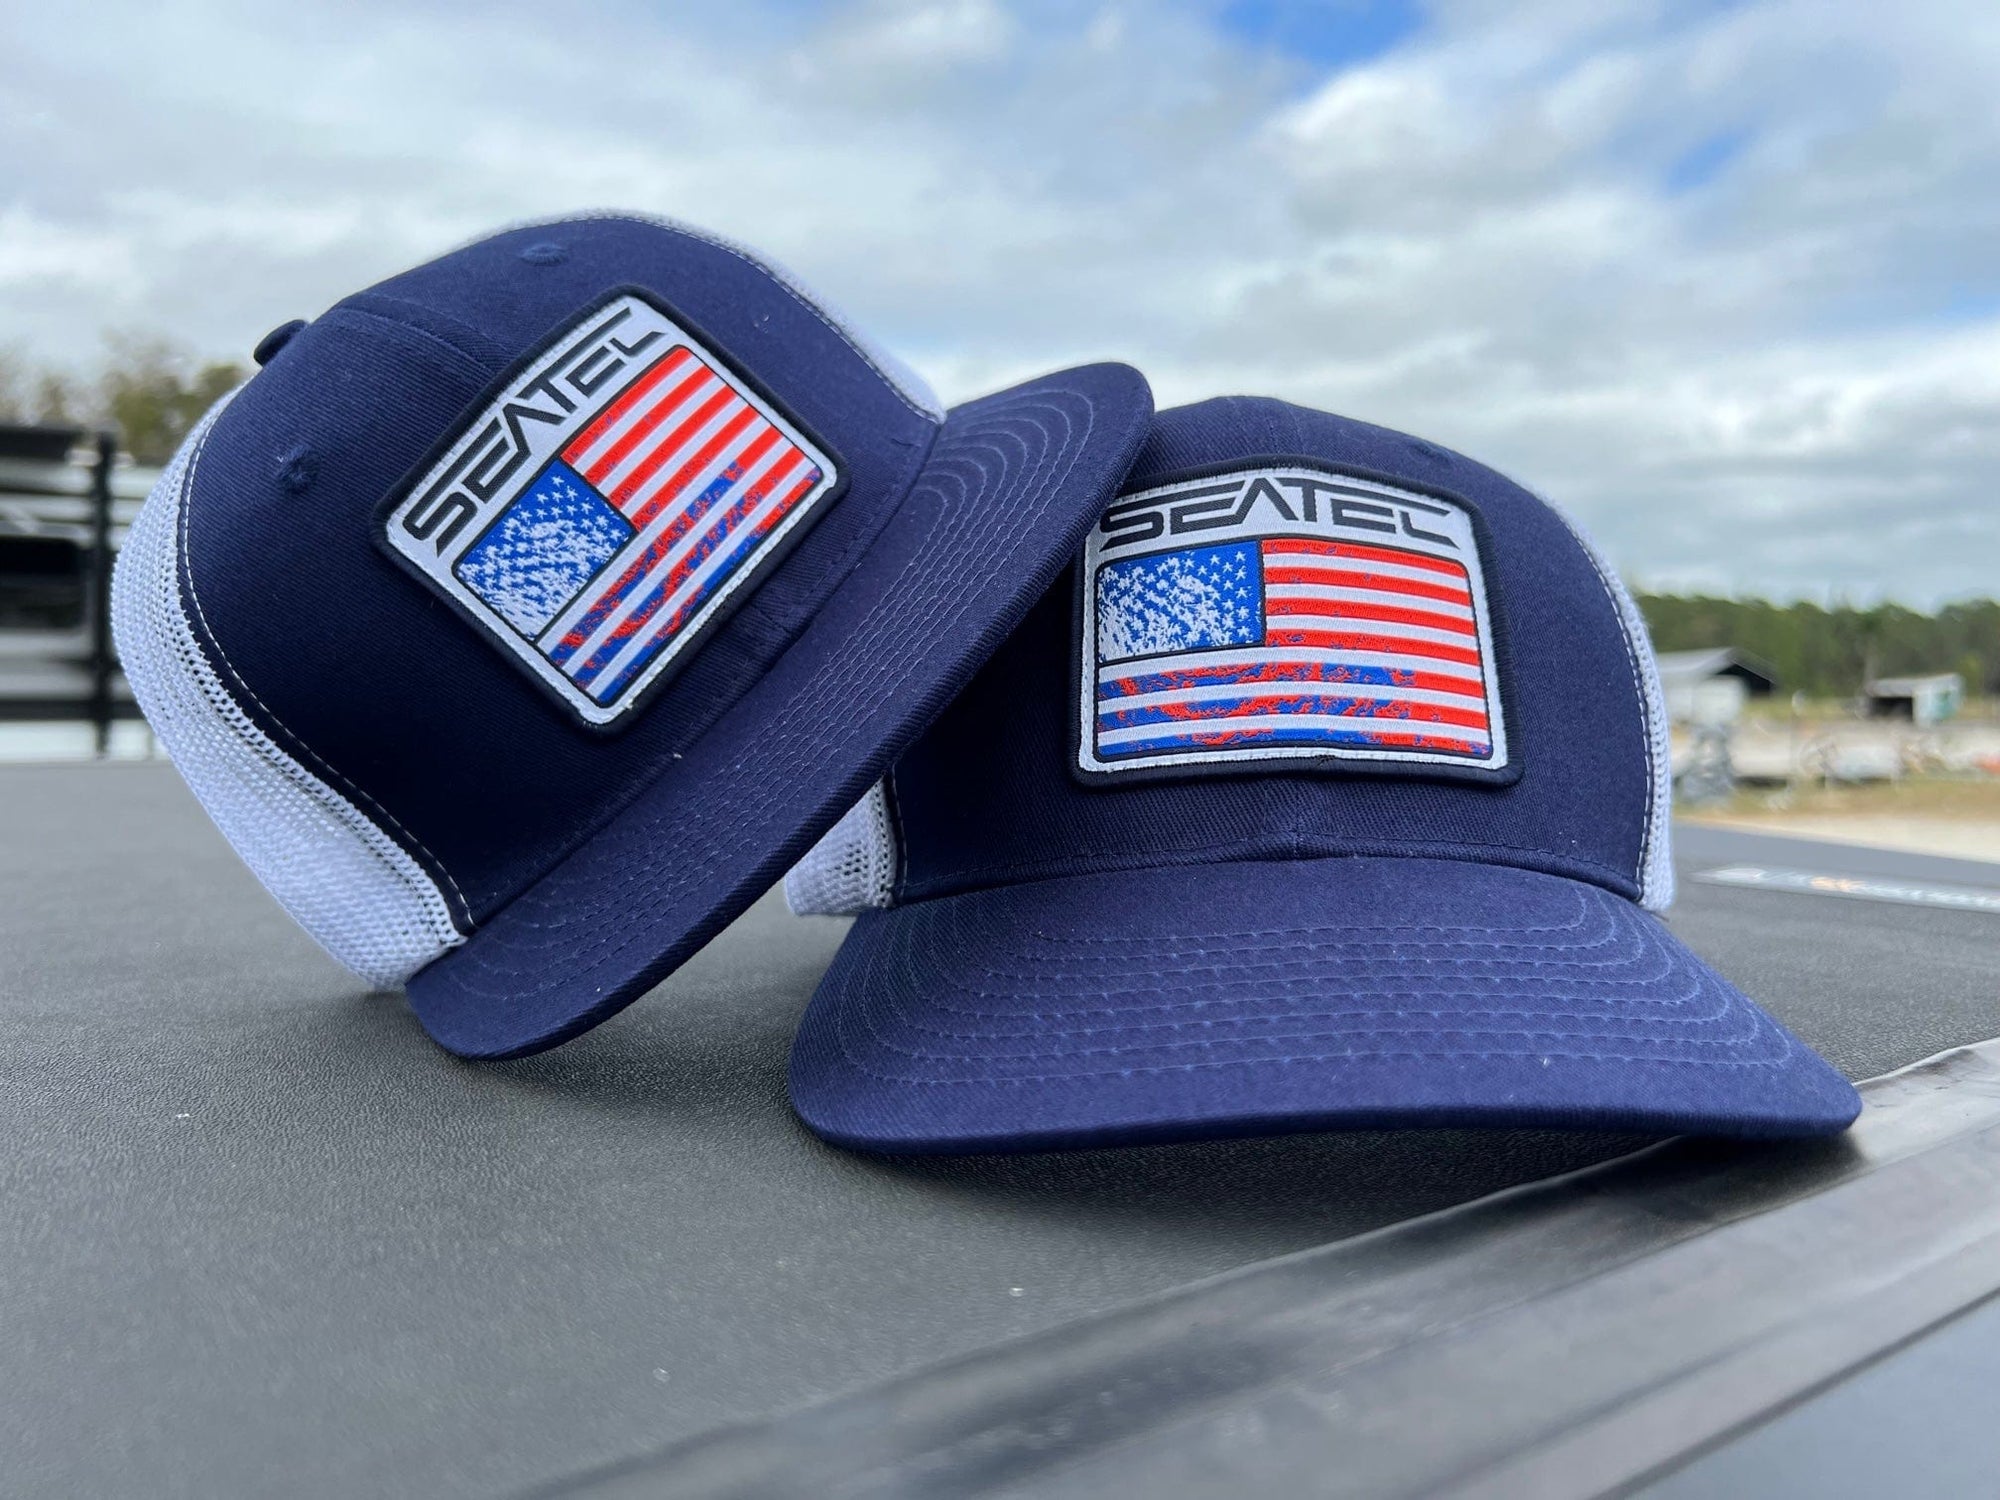 Seatec Outfitters Hats RWB PATCH | TRUCKER HAT